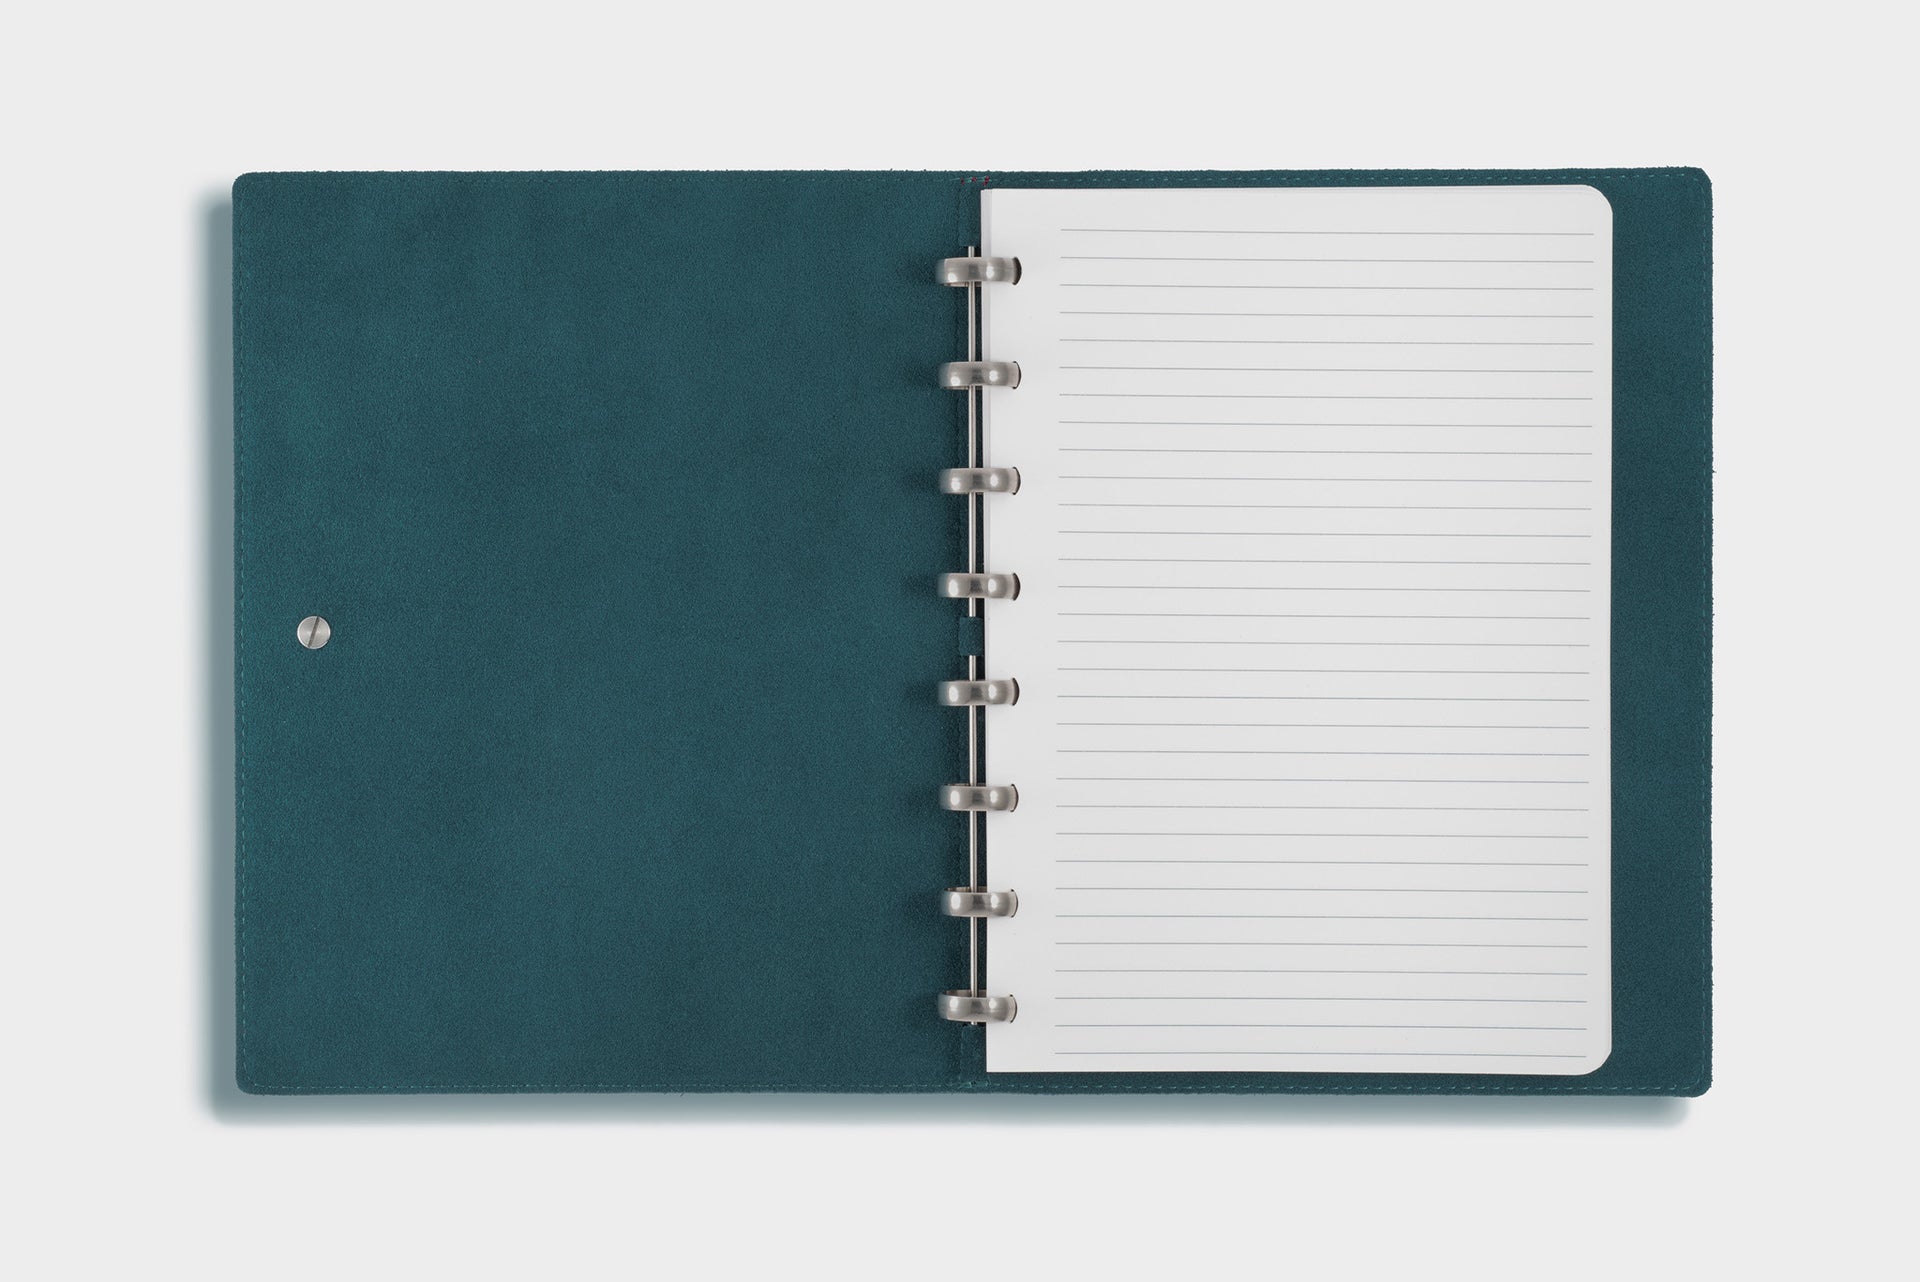 William Hannah Bordeaux leather and Blue suede A5 notebook: inside